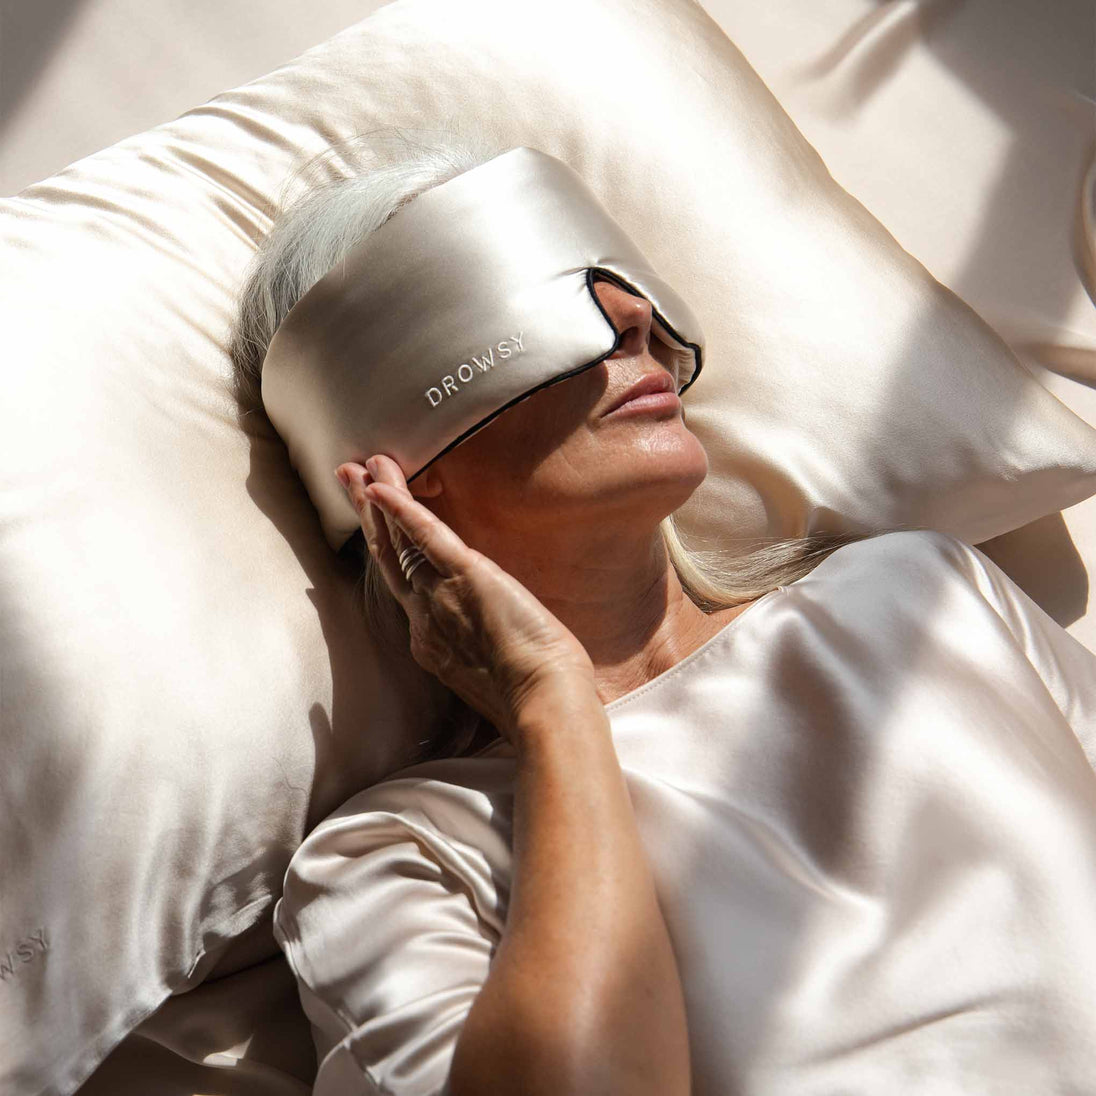 Woman sleeping on a dusty gold coloured Drowsy silk pillowcase with a Drowsy silk sleep mask covering her eyes